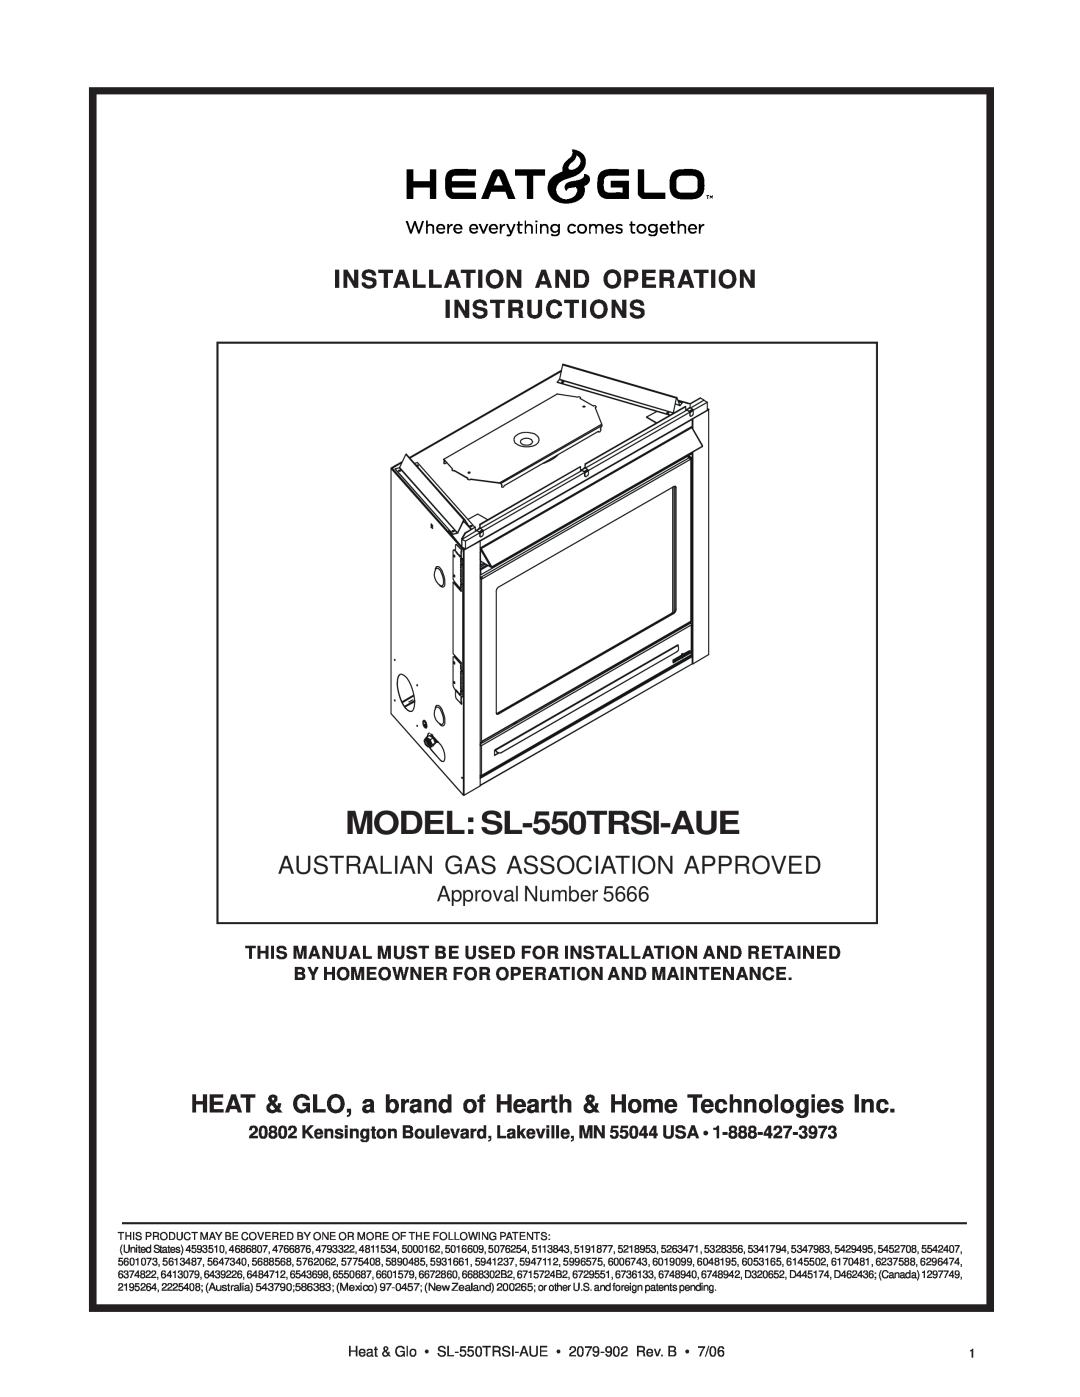 Hearth and Home Technologies manual MODEL SL-550TRSI-AUE, Installation And Operation Instructions 